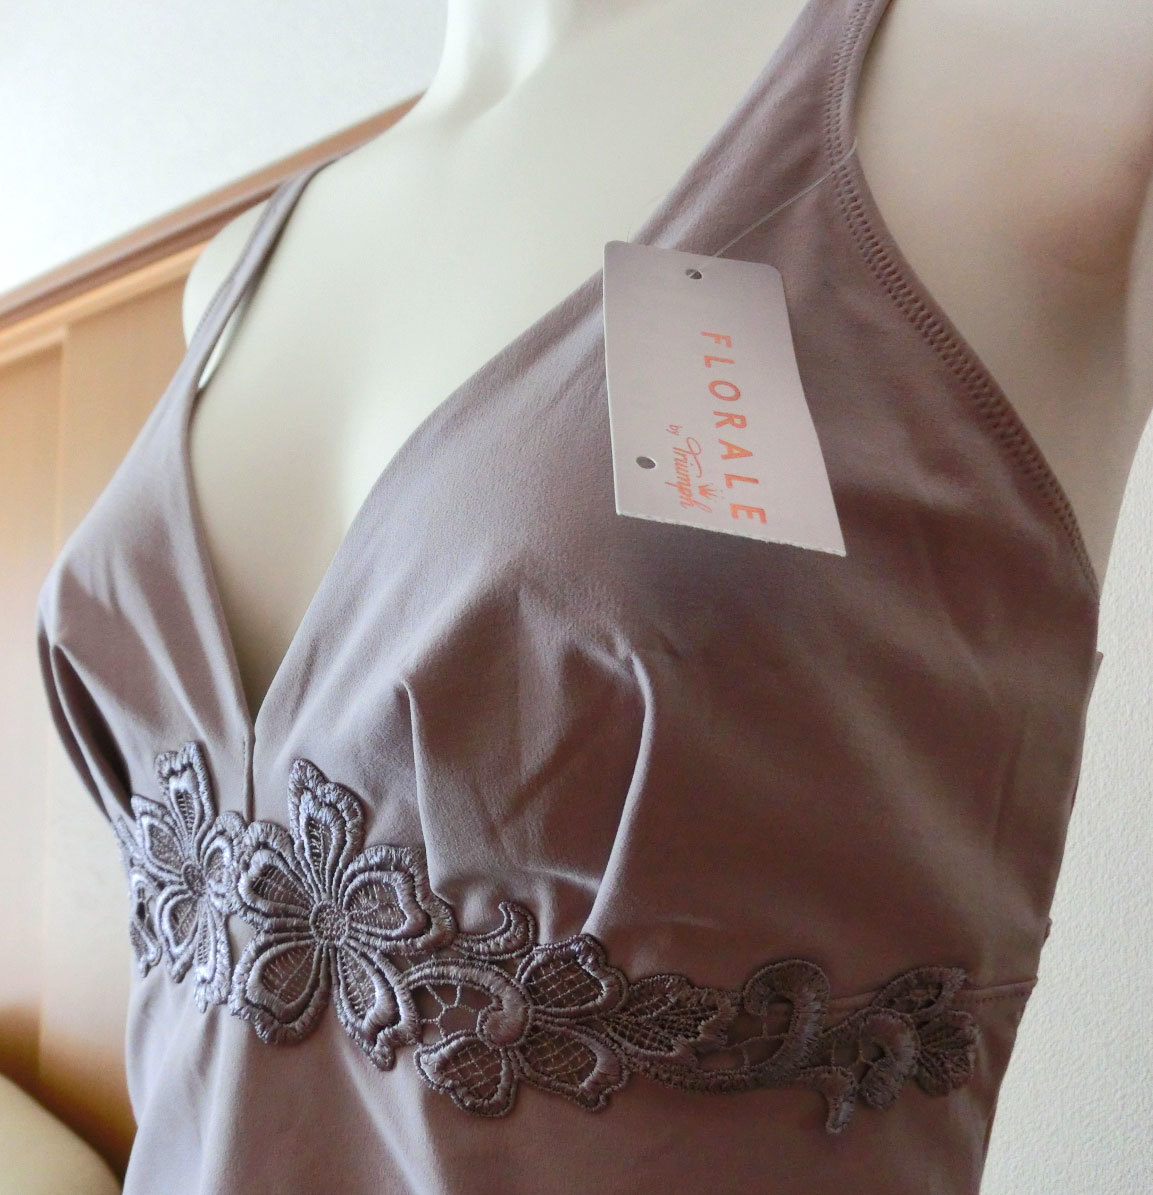 18to Lynn pfrola-reFLORALE FL401 CAMI camisole 80. purple series? purple series? high class Cami inner race see . Cami 